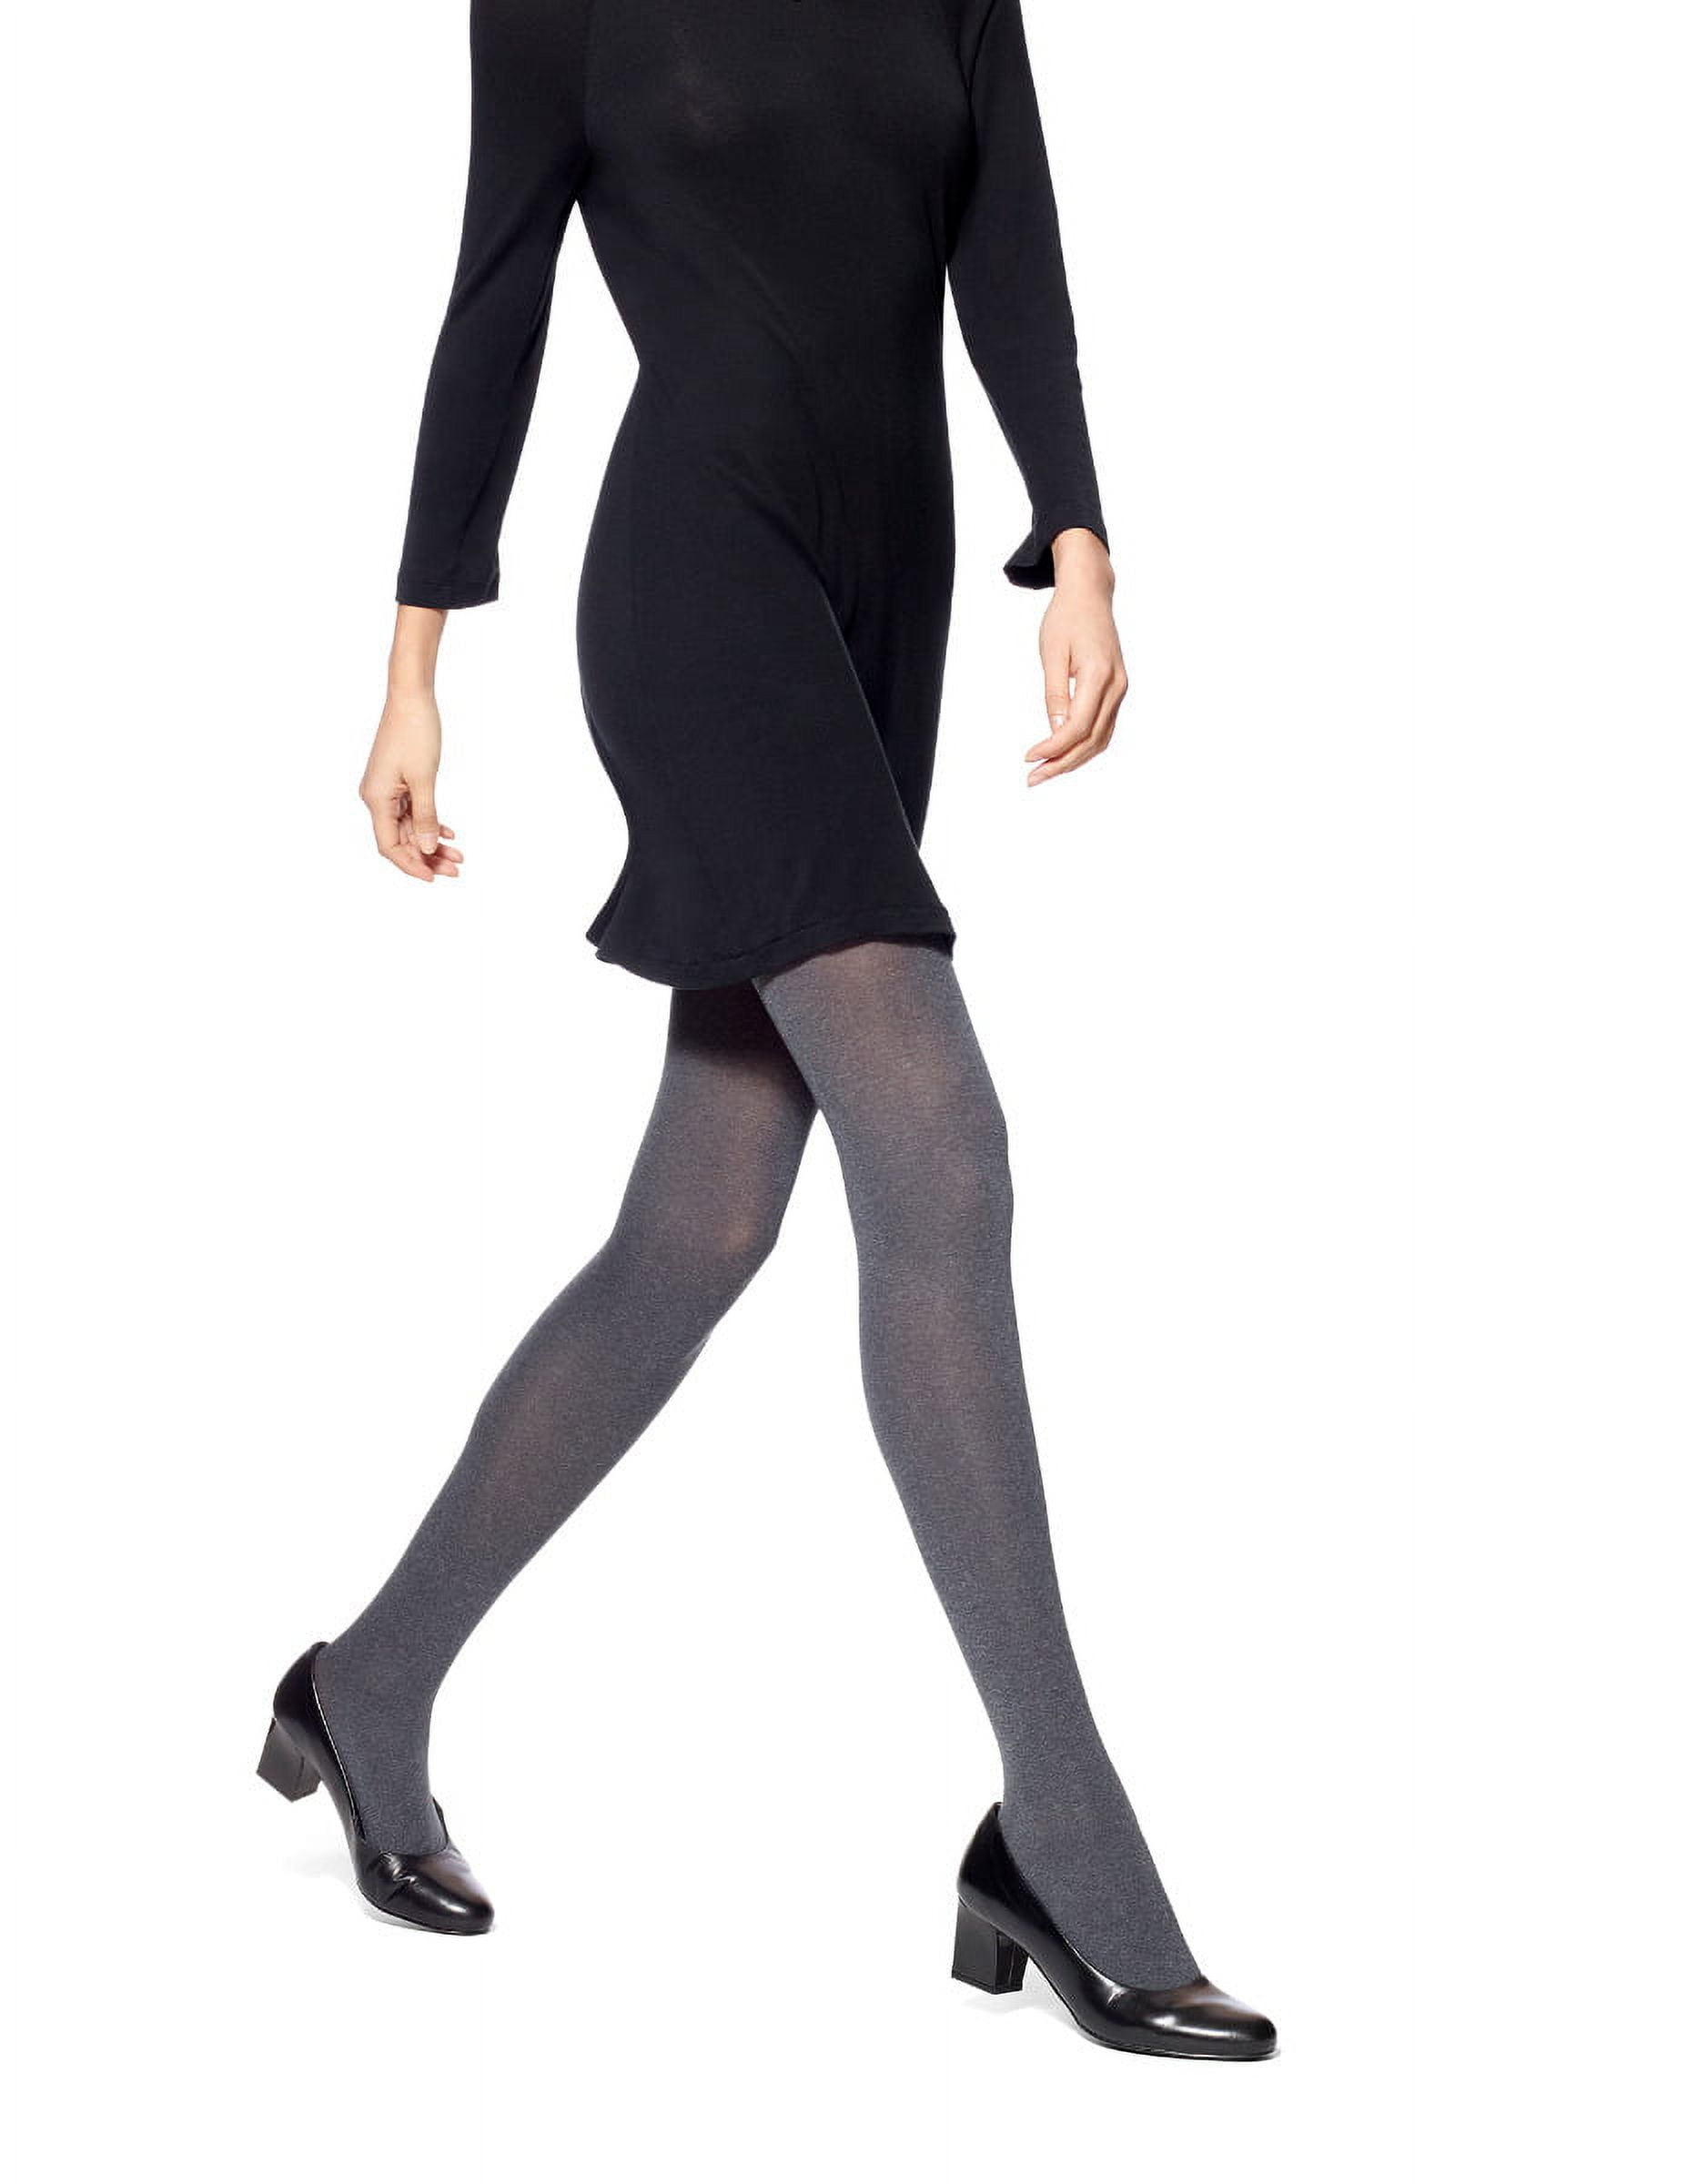 No nonsense Women's Super Opaque Control Top Tights 1 Pair Pack